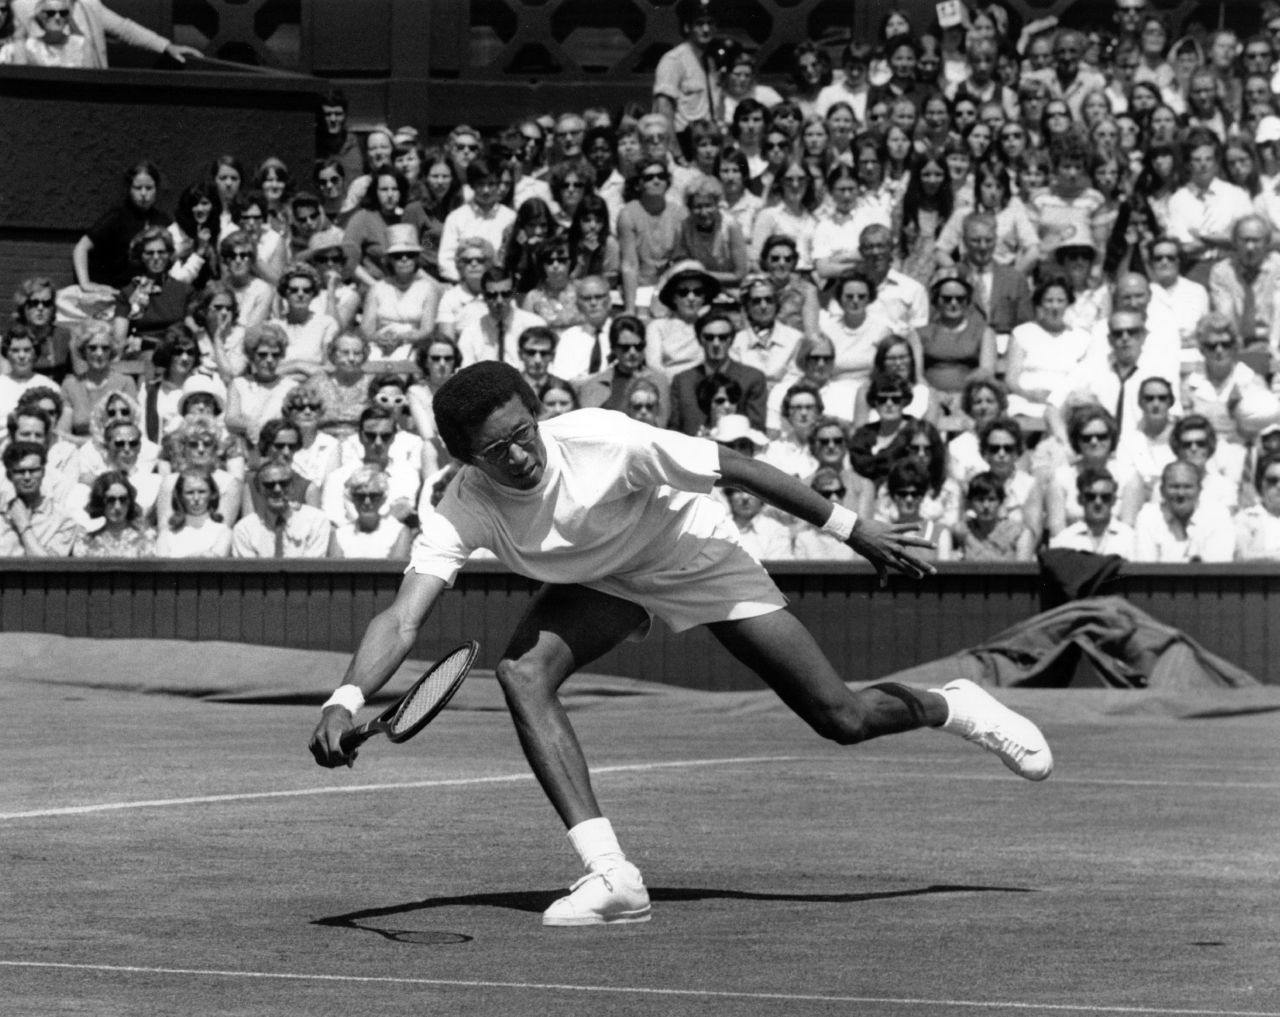 Gibson was not only an inspiration for female tennis players, but also for men's stars such as Arthur Ashe -- the only black male player to win the U.S. Open, Wimbledon or Australian Open titles. The U.S. Open's main stadium is named after him.